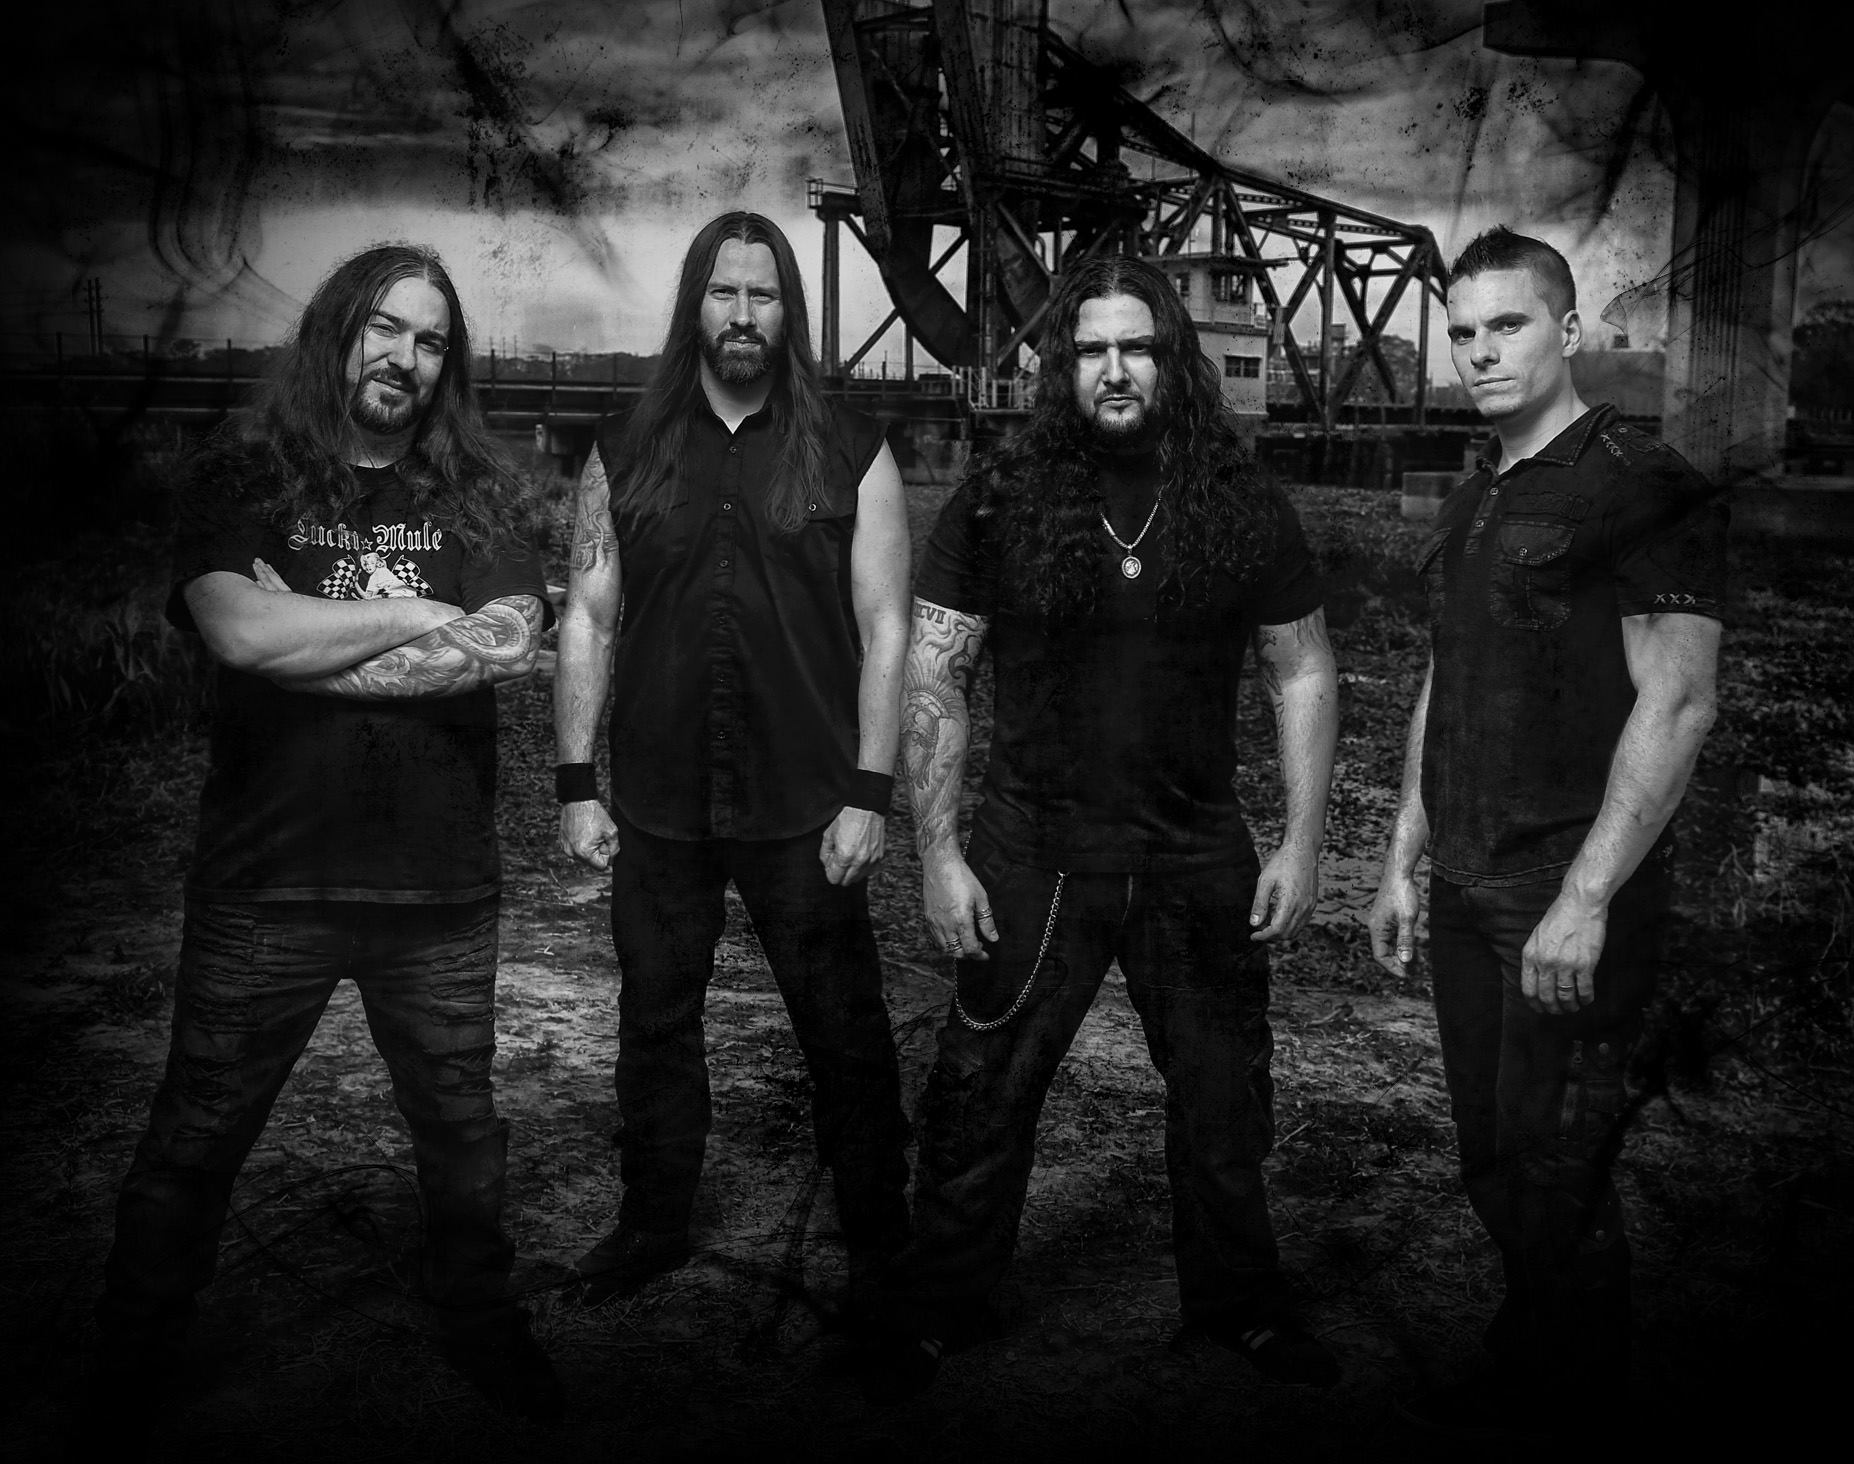 Amazing Kataklysm Pictures & Backgrounds